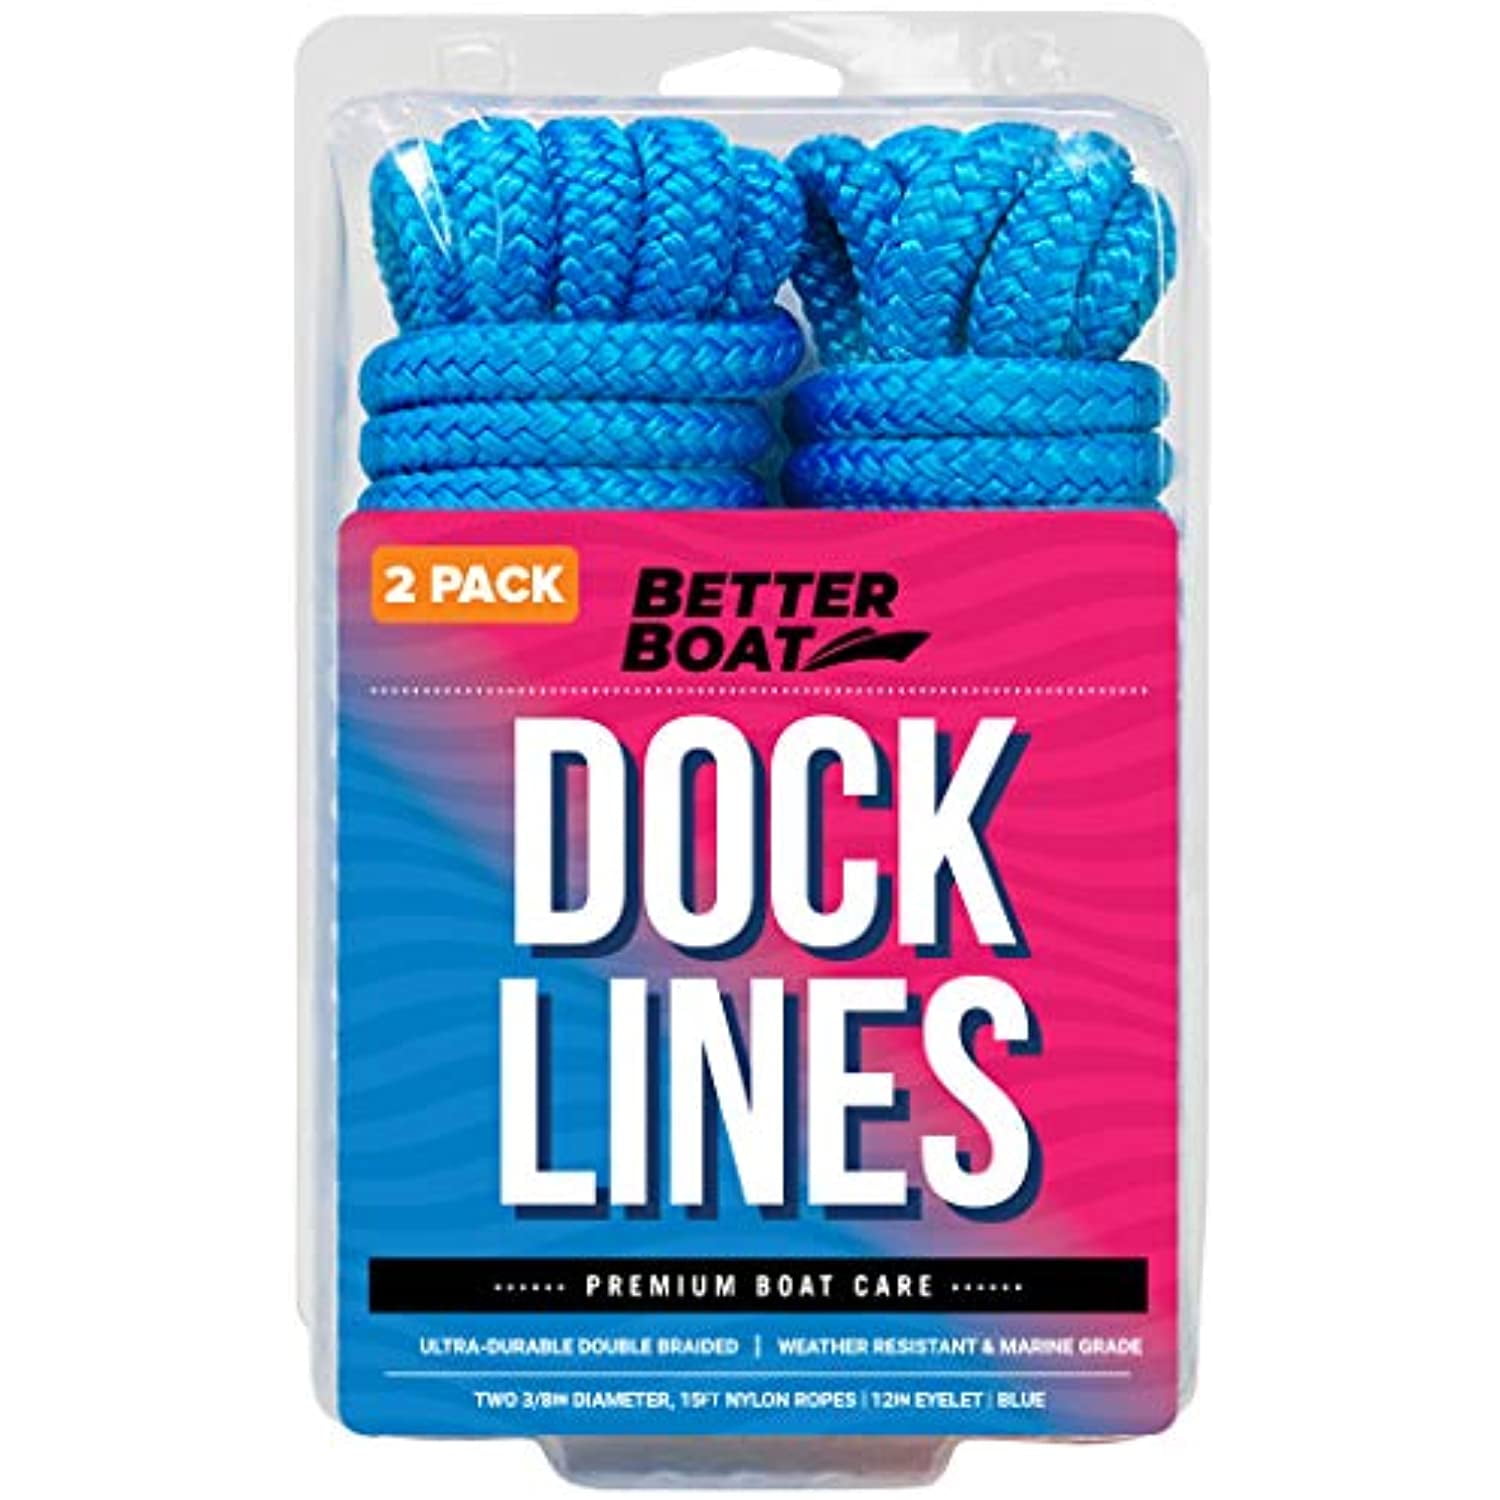 2 4 White Twisted Nylon Boat Dock Lines 3/8" Marine Rope Each 15' & 20' ft 